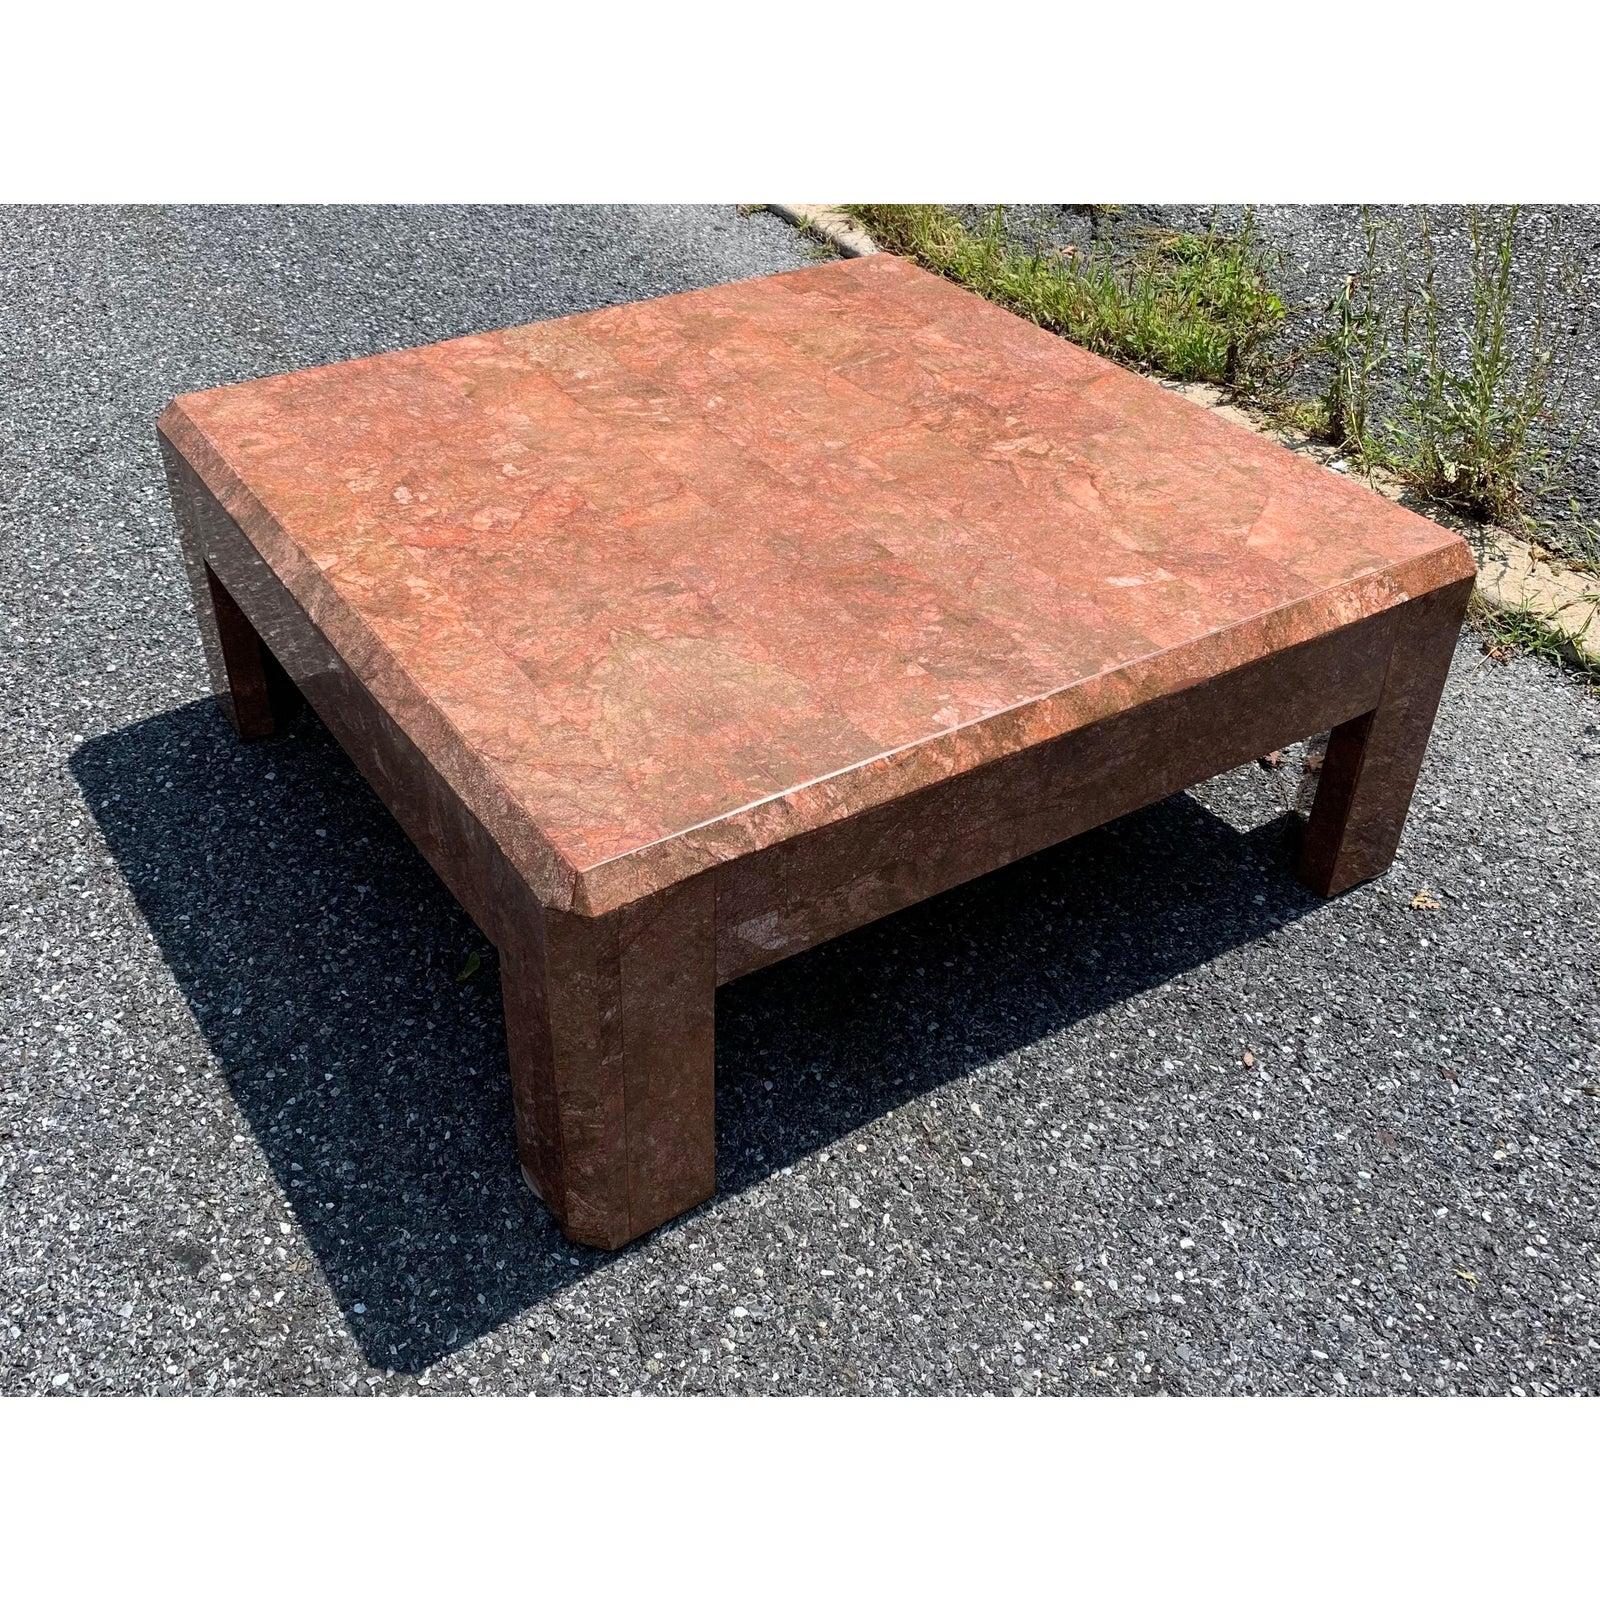 Stunning red marble cocktail table made in the 1970s. 

Beautiful high-quality marble with lovely details.

This table is in pristine condition, with no flaws to note.
